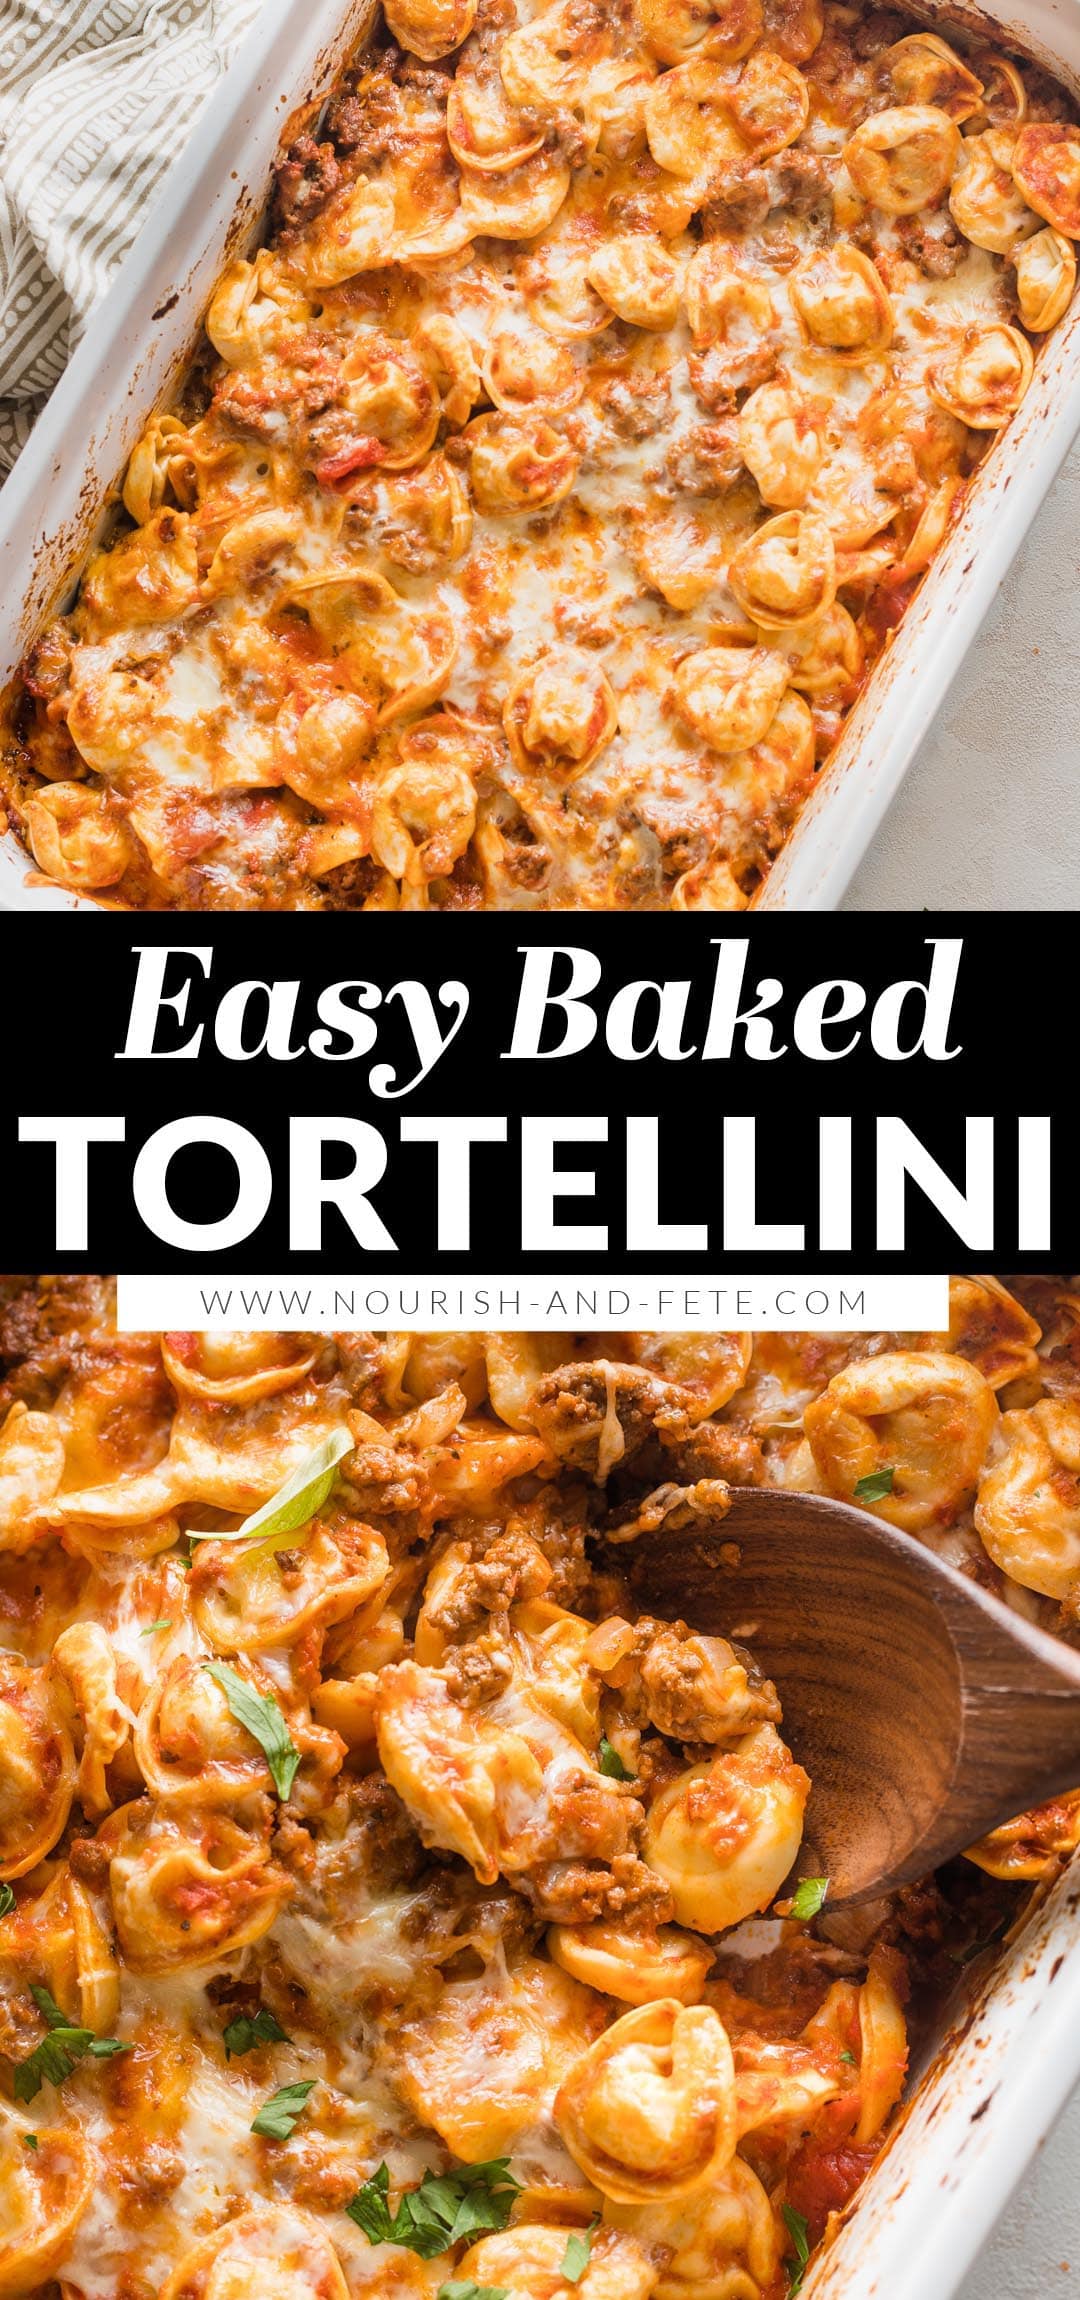 Baked Tortellini (10 Minutes Prep!) - Nourish and Fete